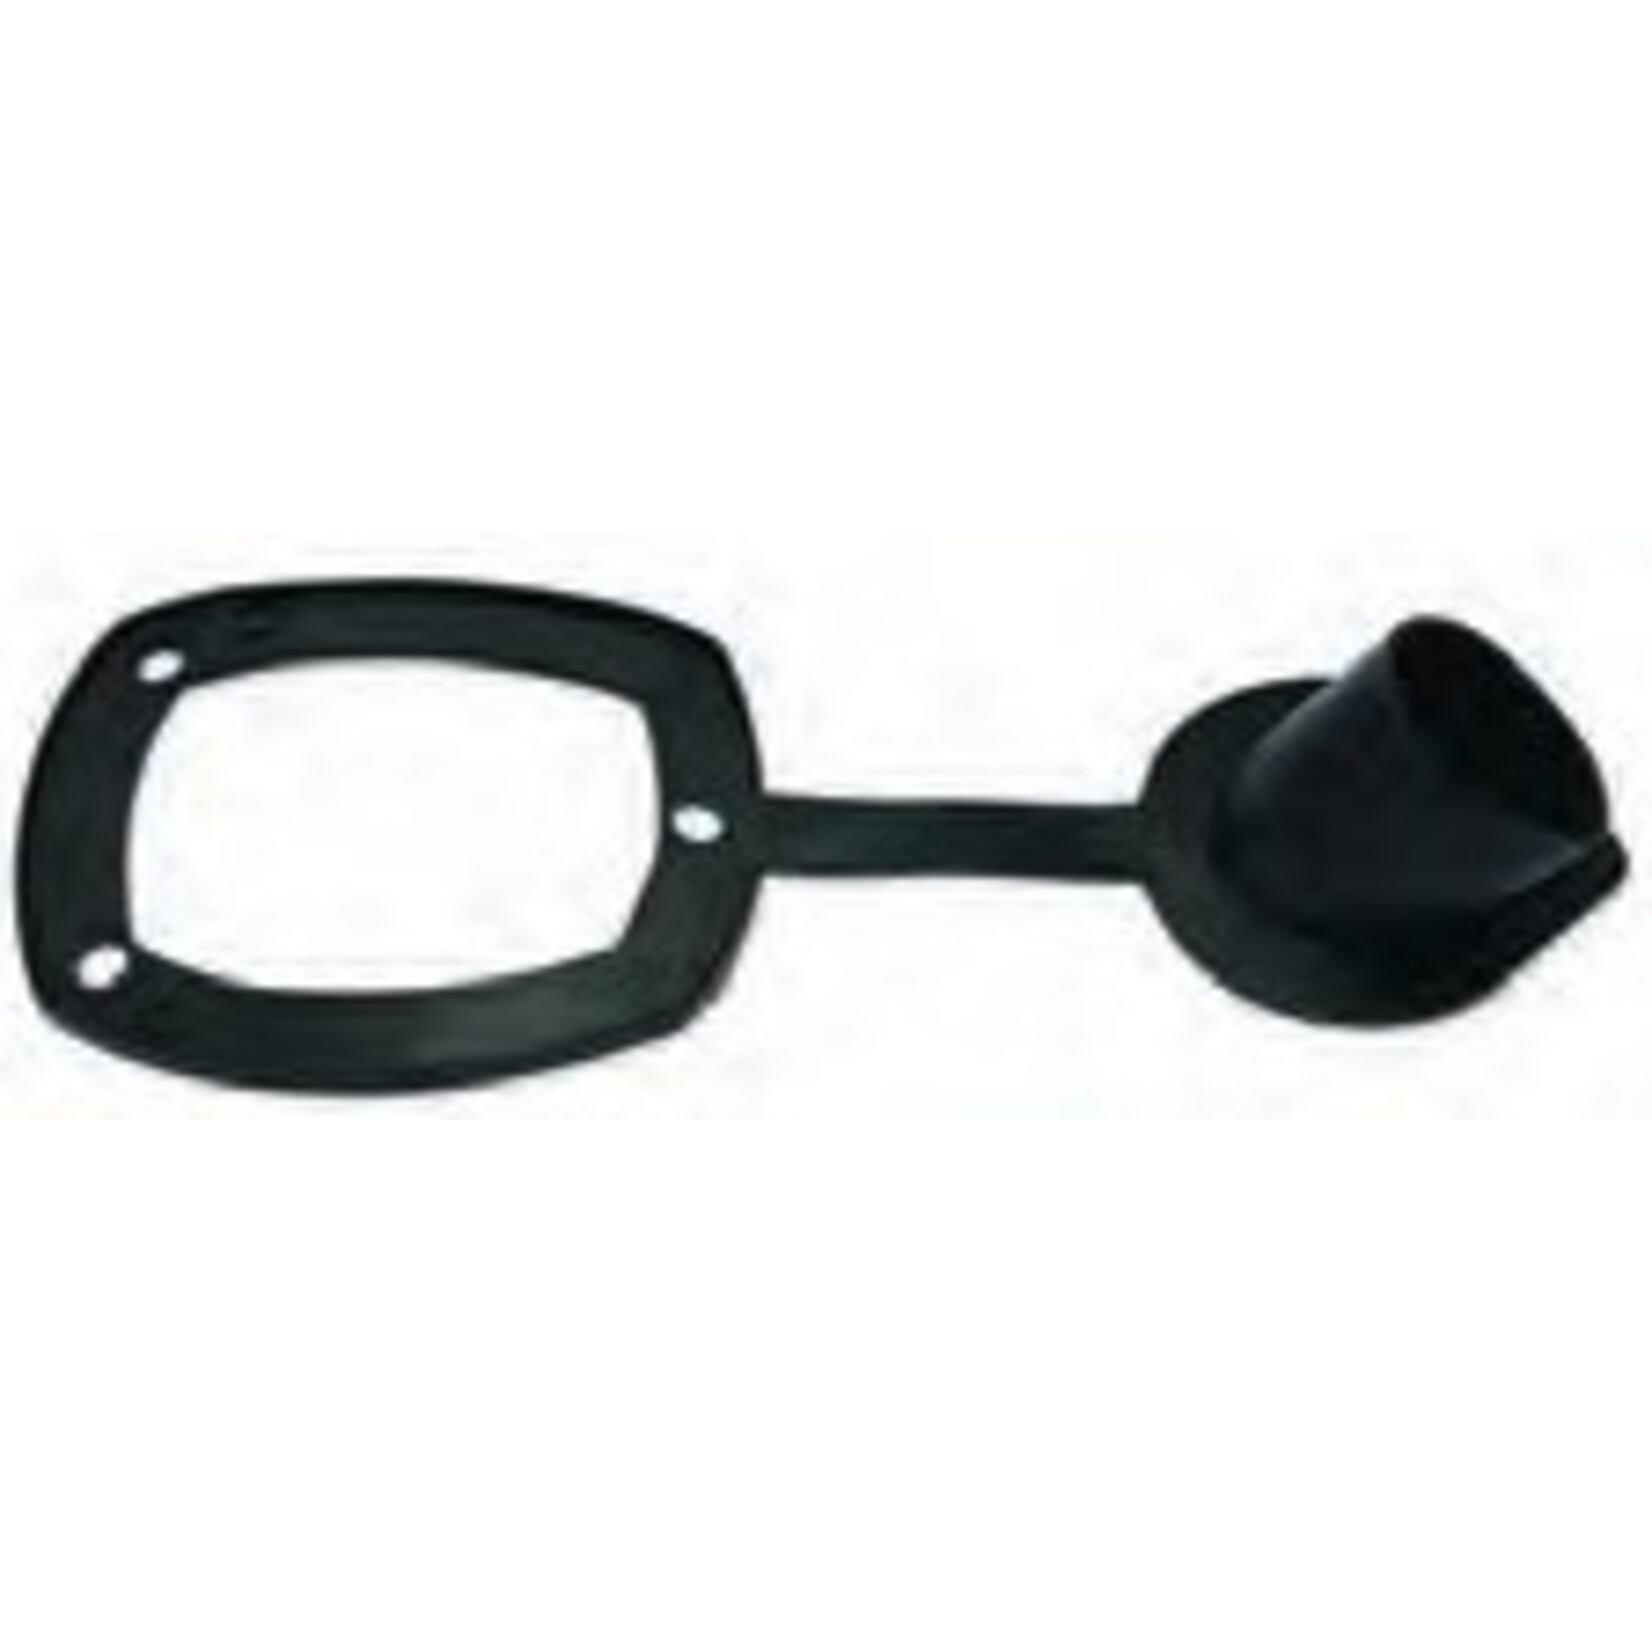 Plastimo Spare gasket & cap for 400597